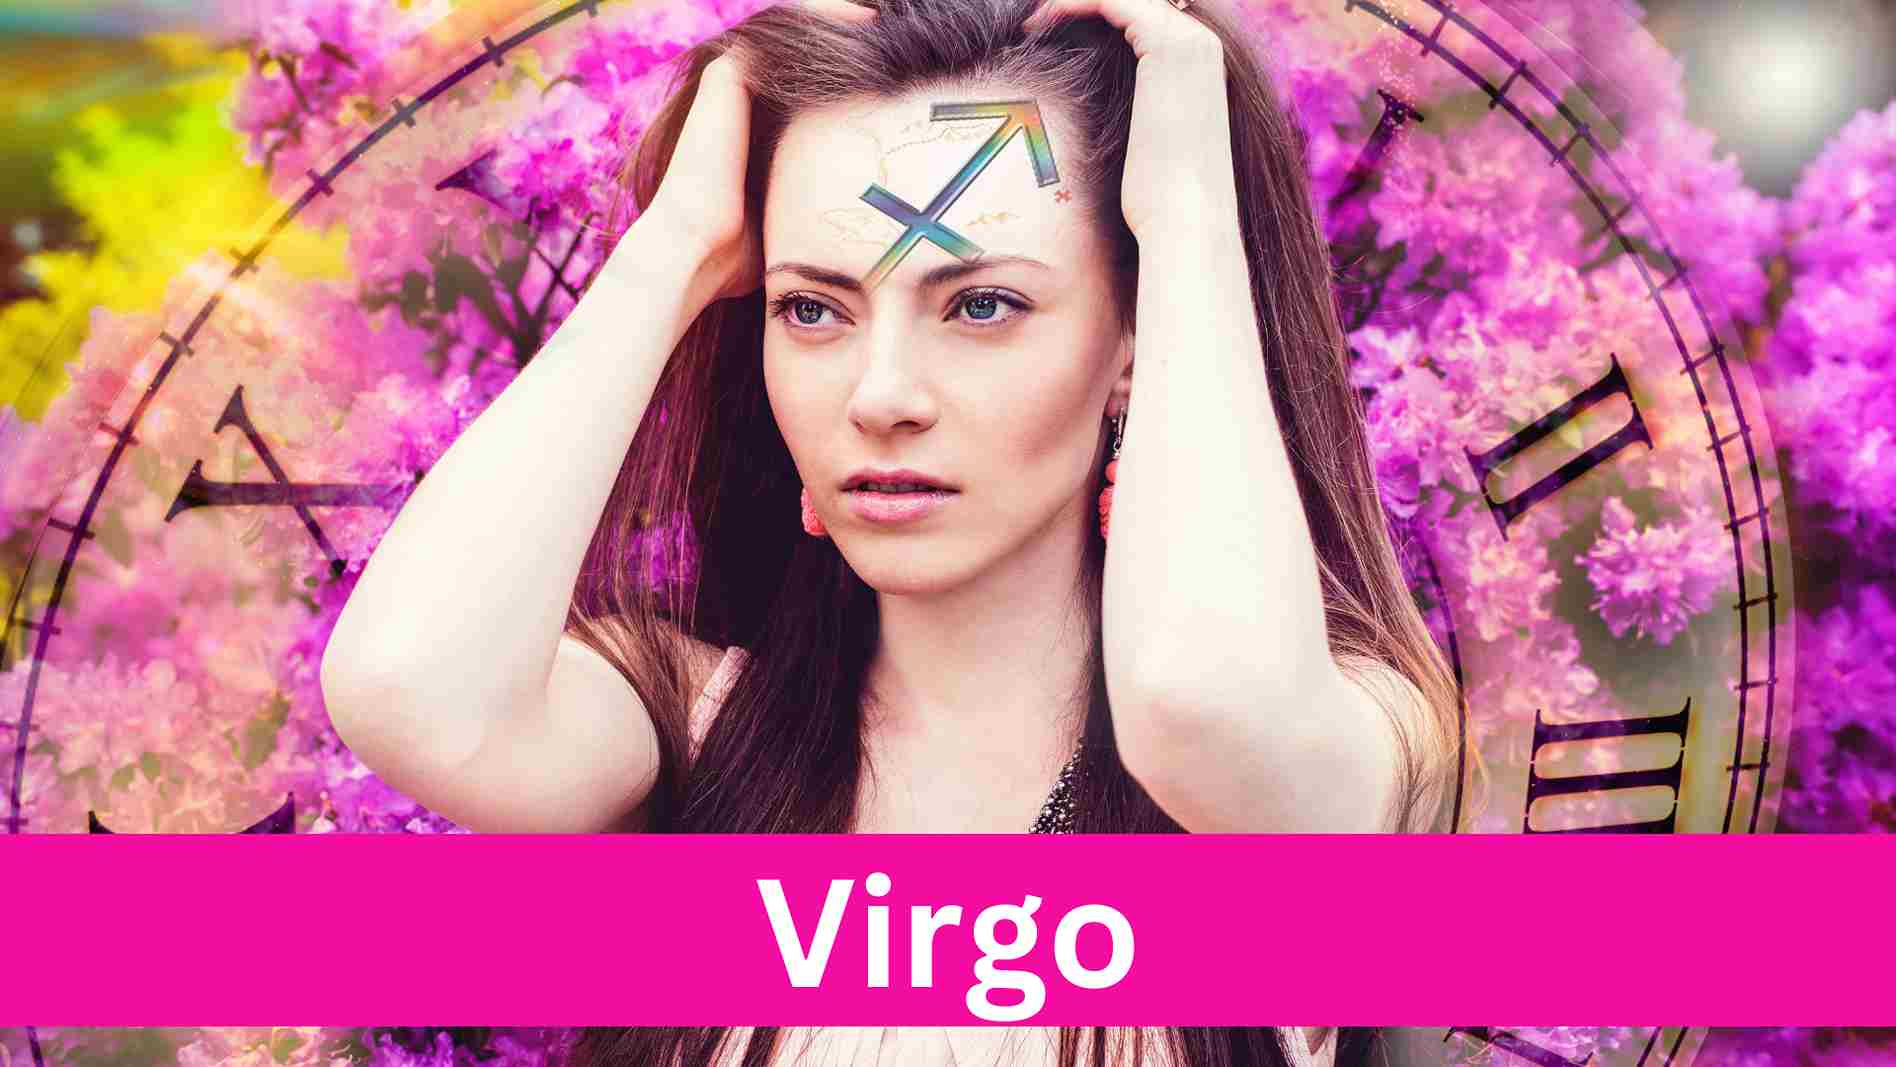 You are currently viewing Virgo horoscope prediction for 2023